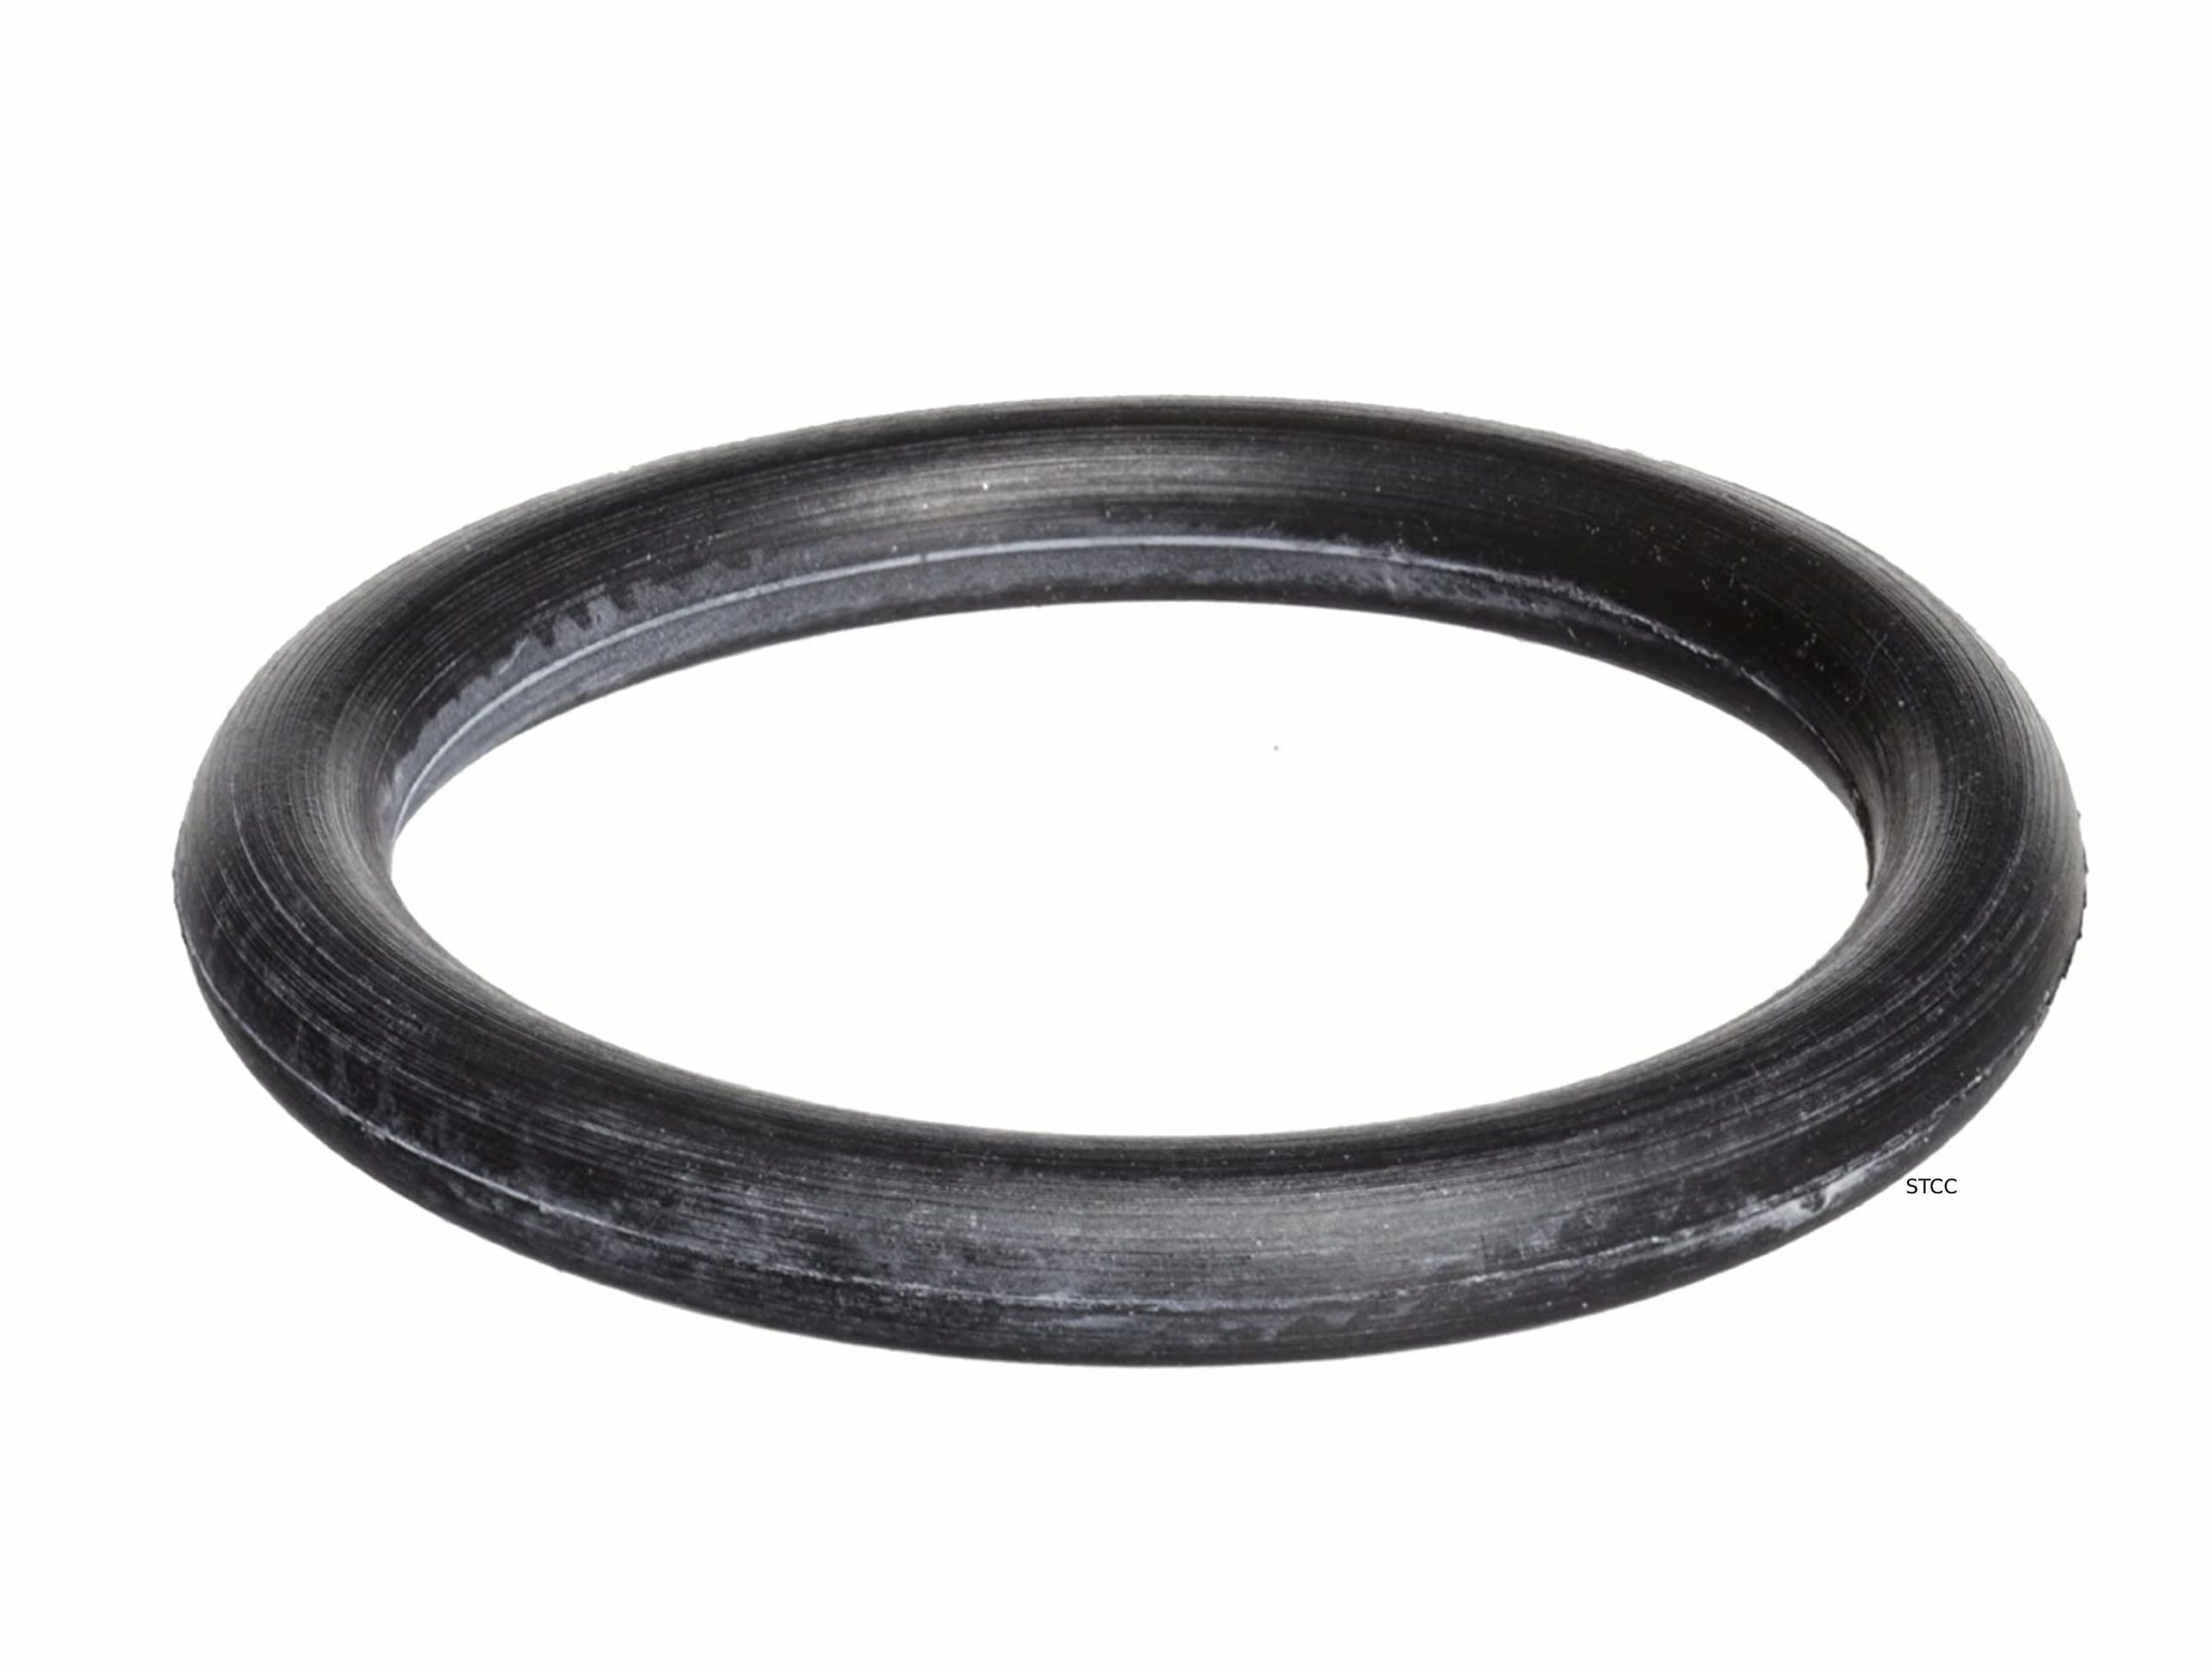 FKM O Ring Kit,75A Durometer,30 Inch Sizes,382 Pieces,for Various Chemicals,Hydraulic